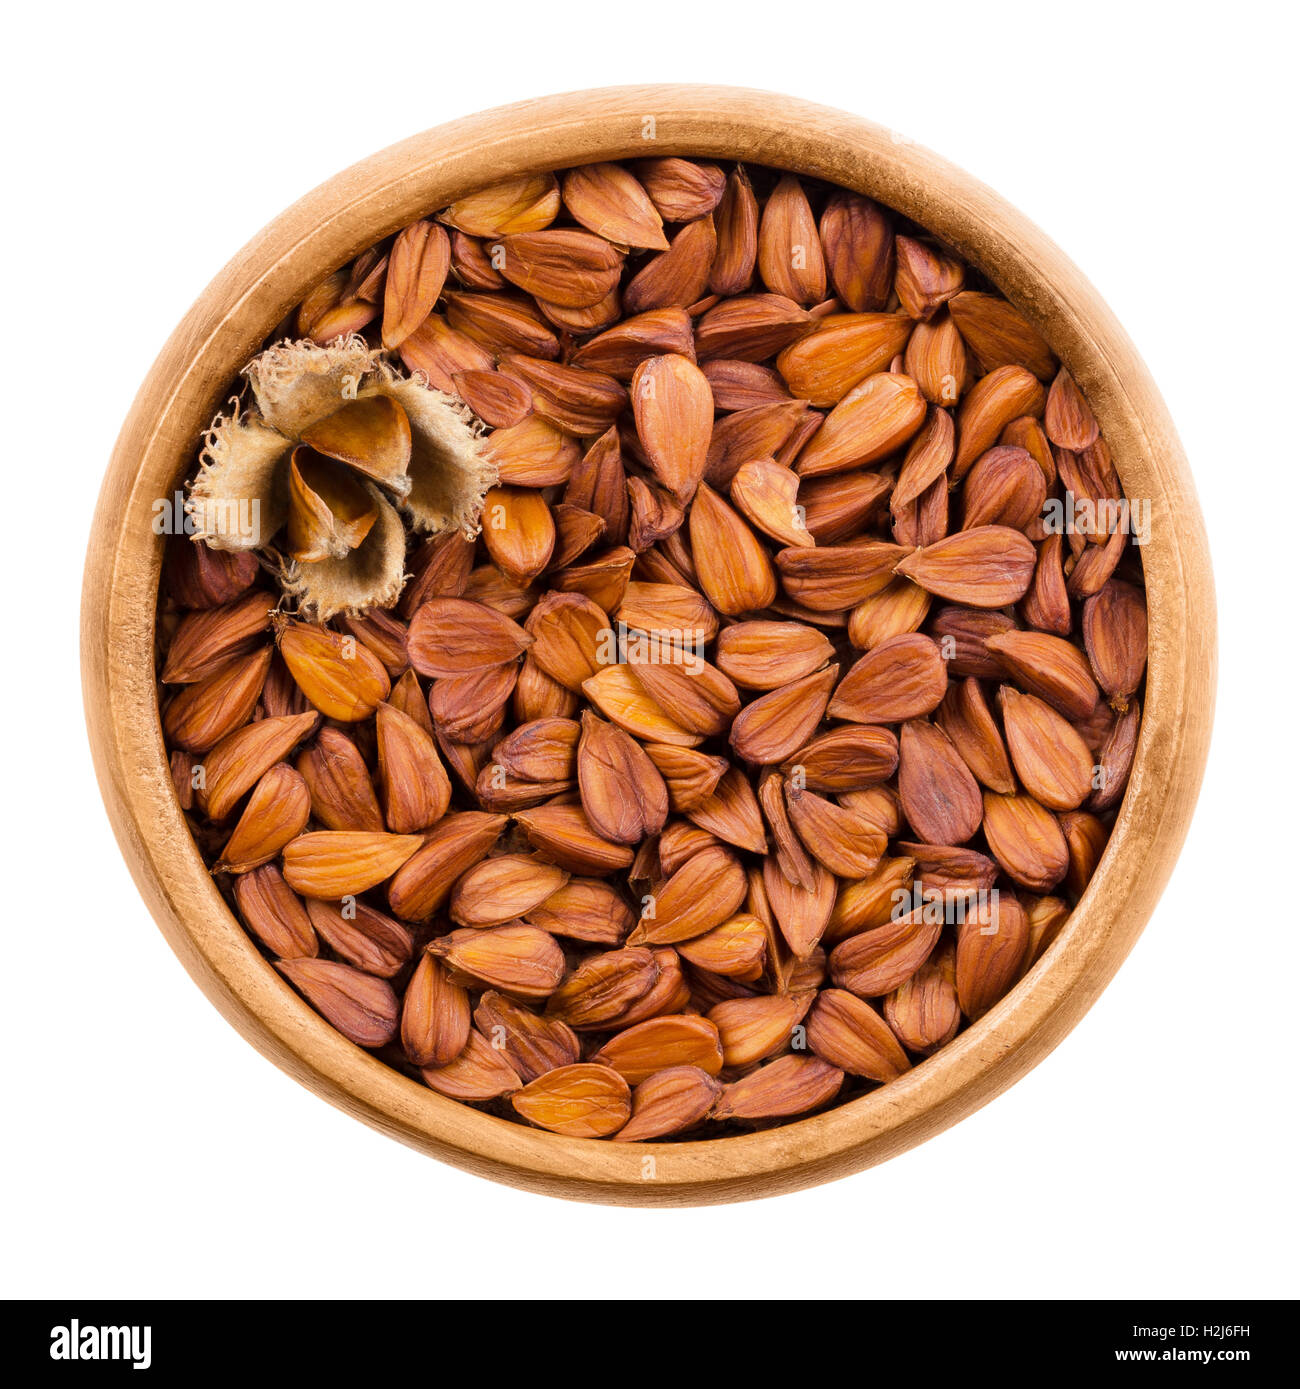 Shelled beechnuts in a wooden bowl on white background, also called mast, with a burr. Brown seeds of European beech. Stock Photo